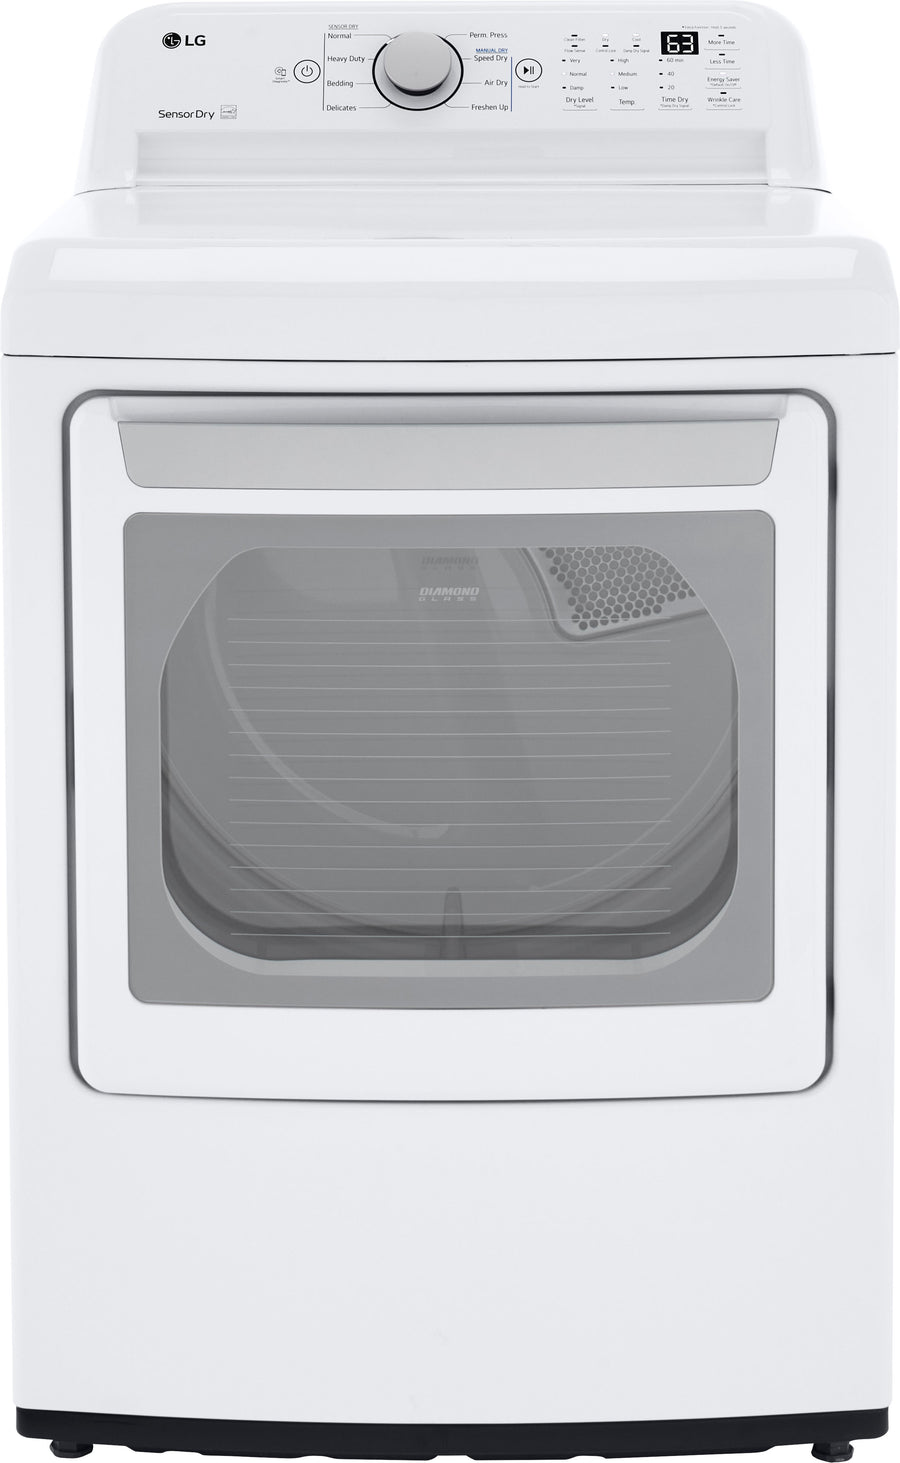 LG - 7.3 Cu Ft Gas Dryer with Sensor Dry - White_0